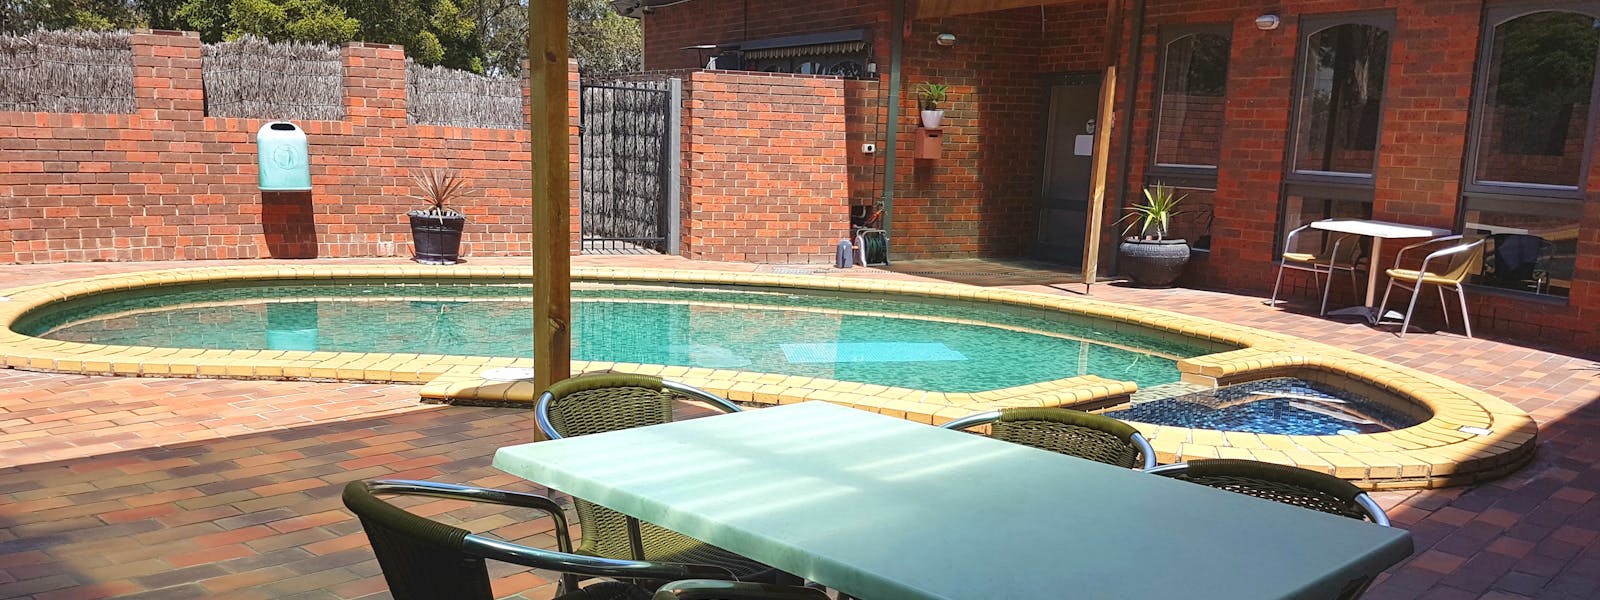 Outdoor pool/spa terrace and barbecue area